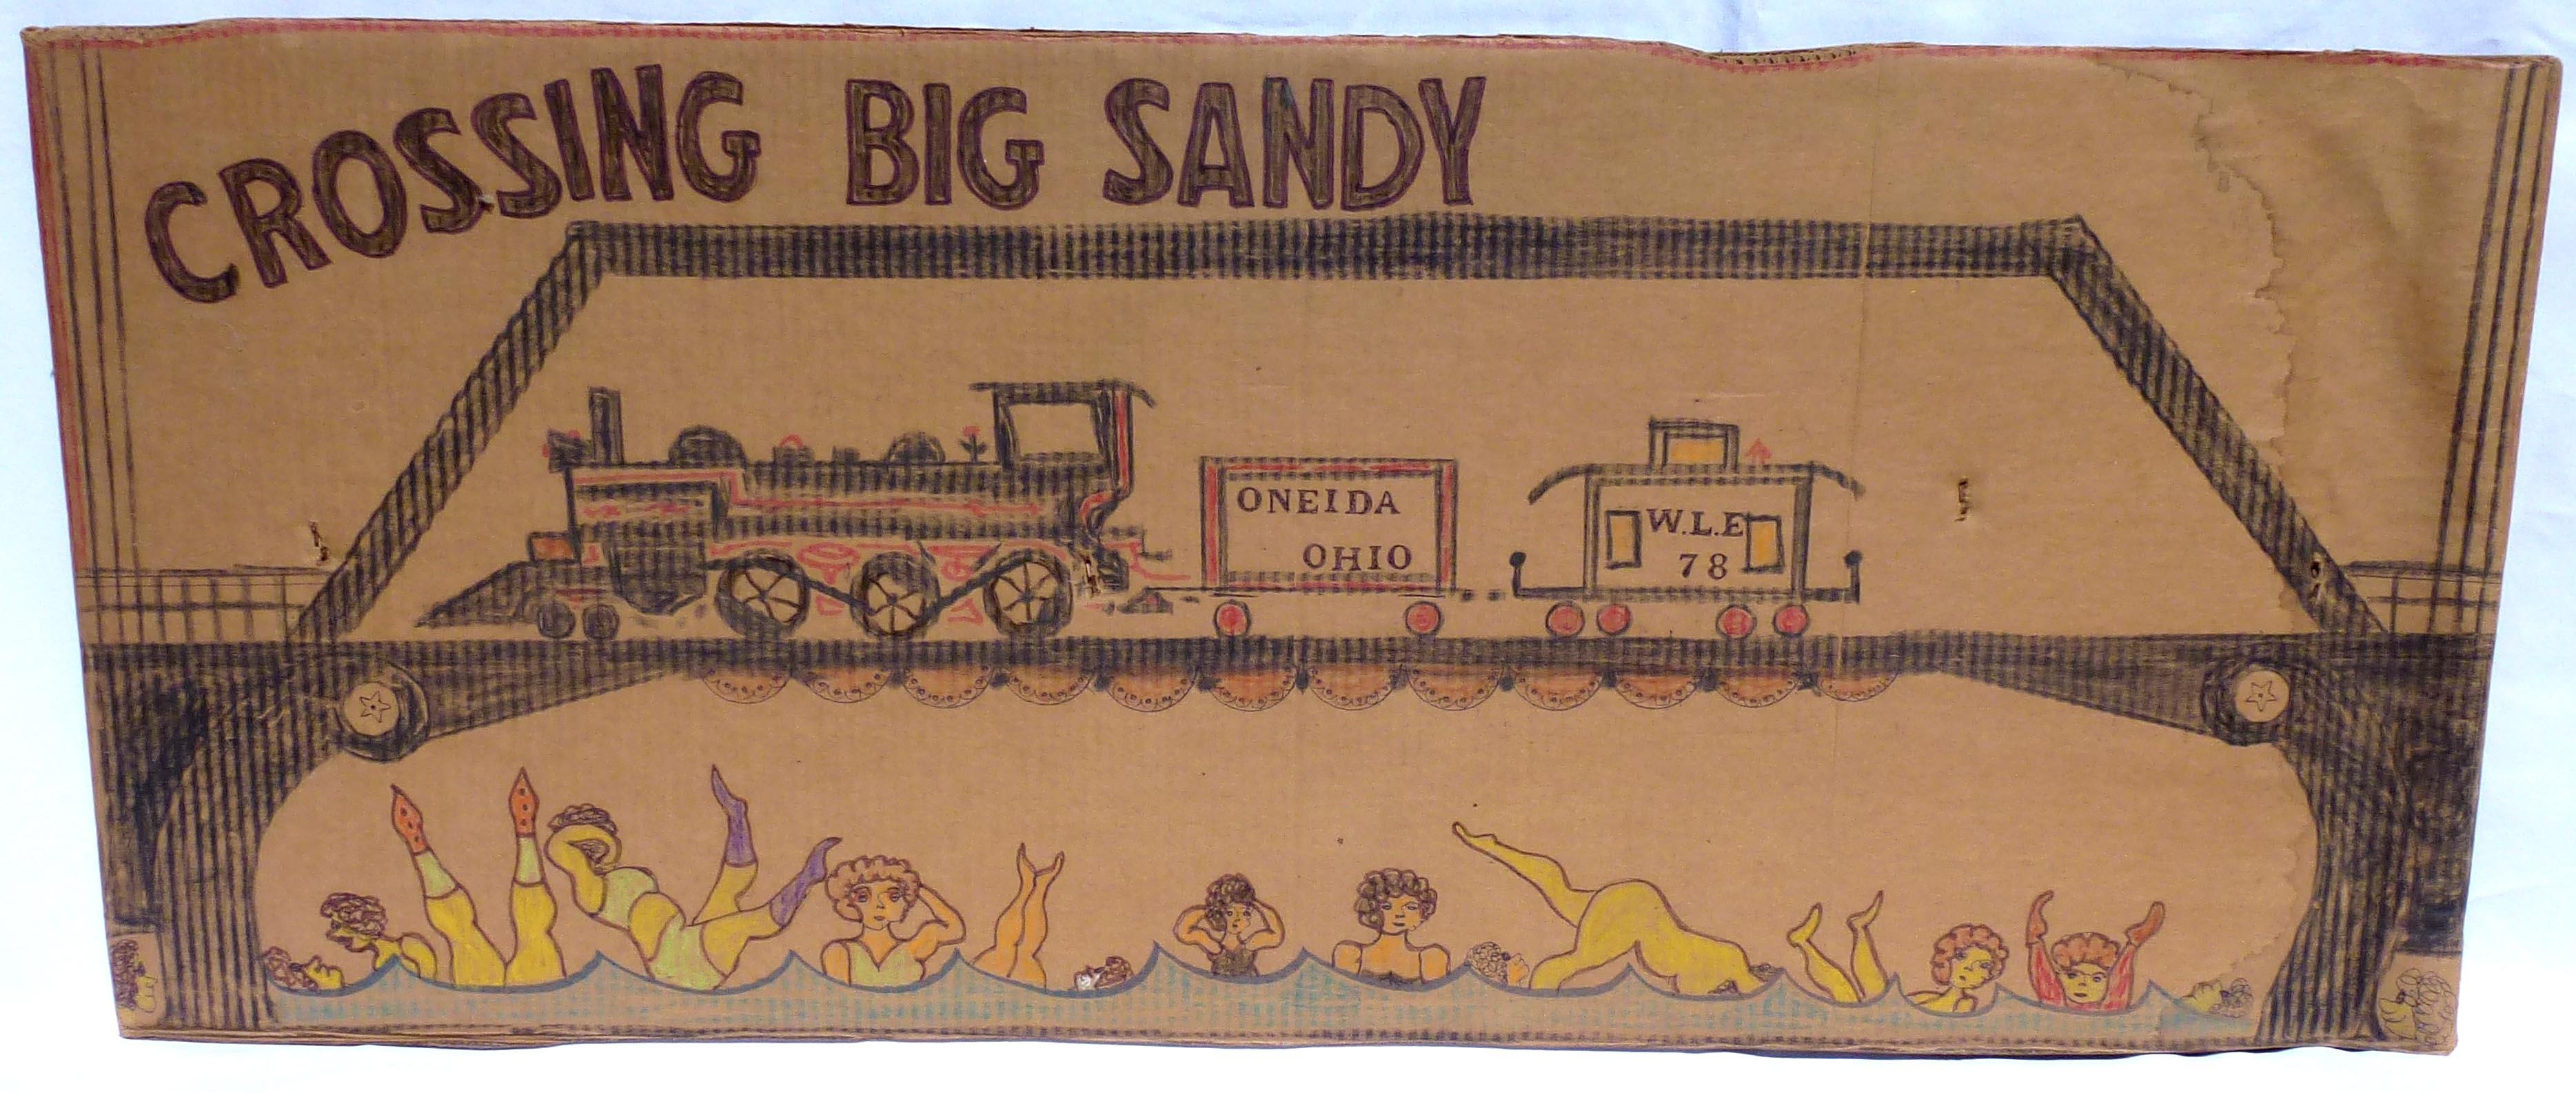 Crossing Big Sandy by the late outsider artist Lewis Smith. 21